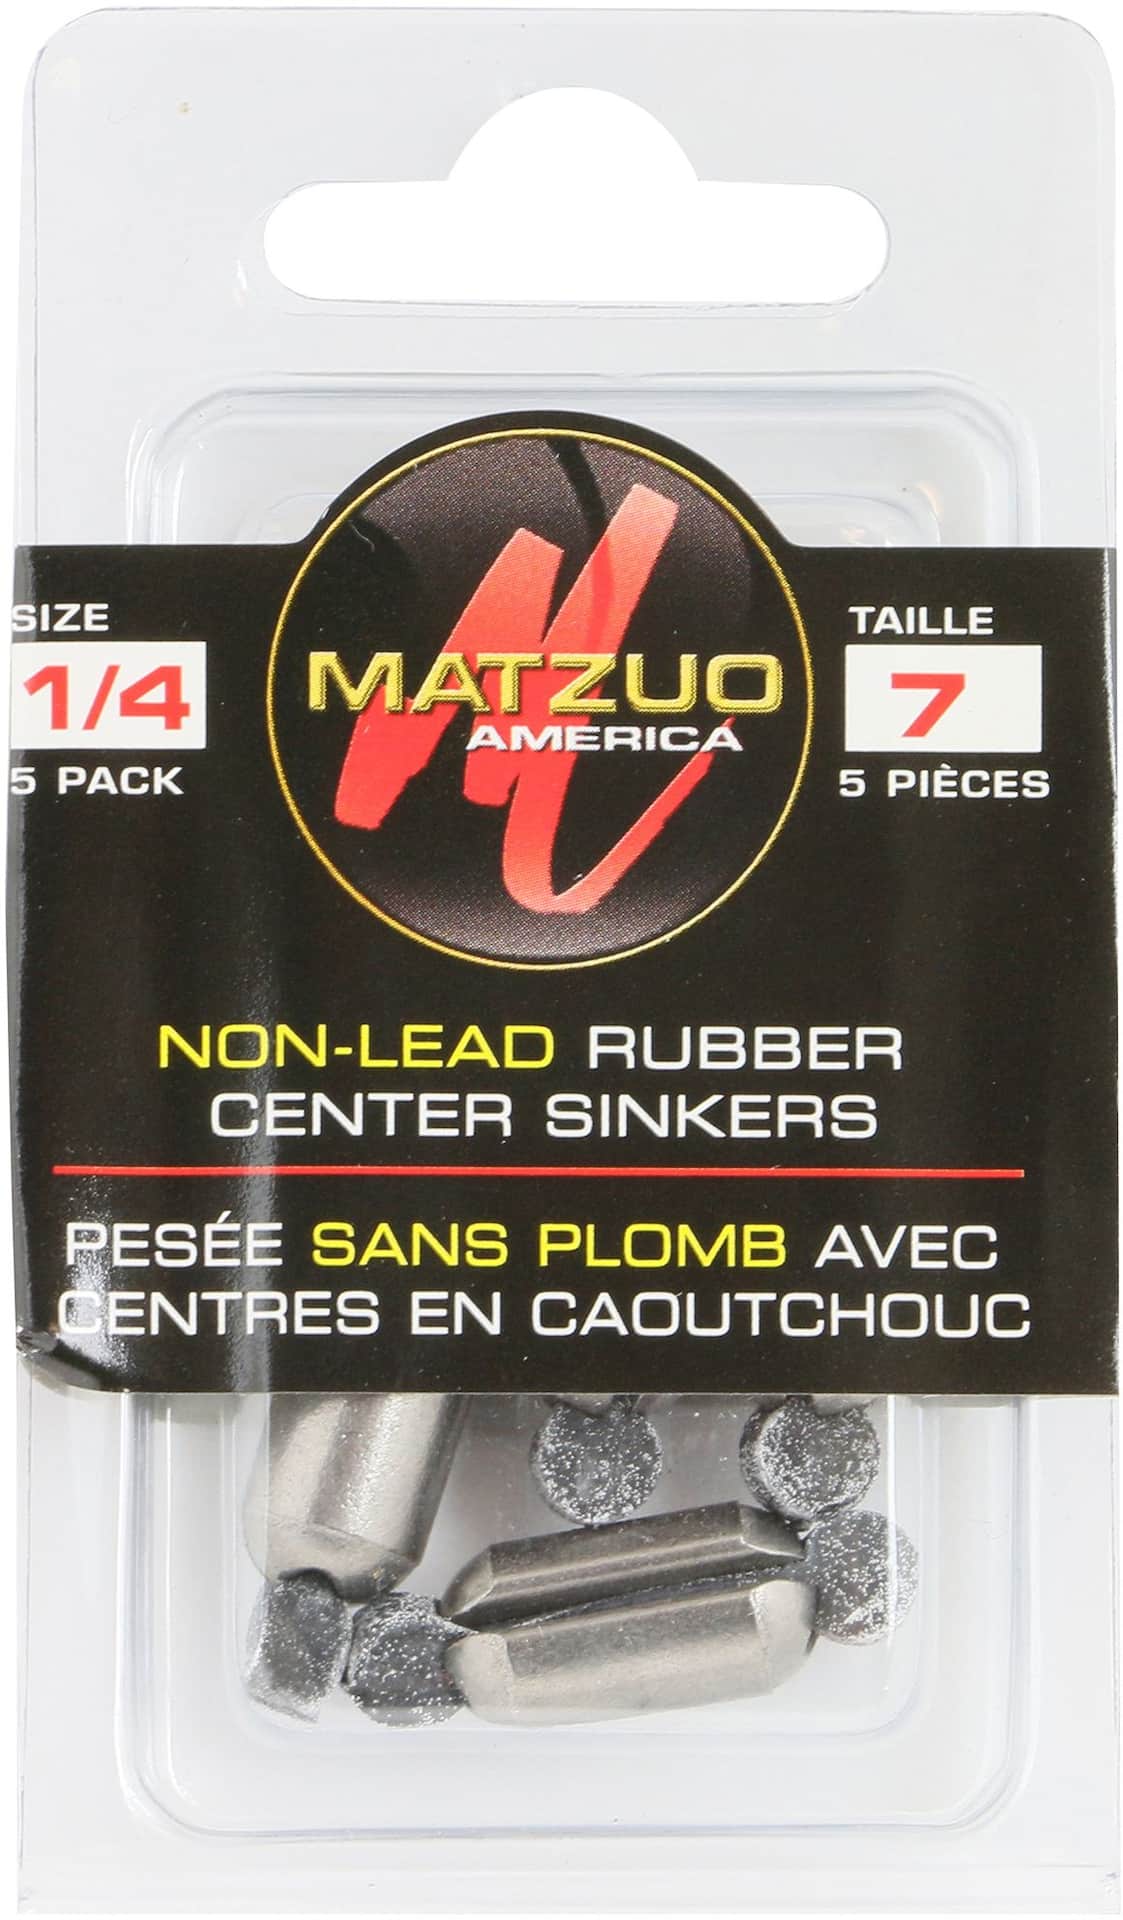 (27) 3oz Pyramid Sinkers - Lead Fishing Weights - Free Shipping.